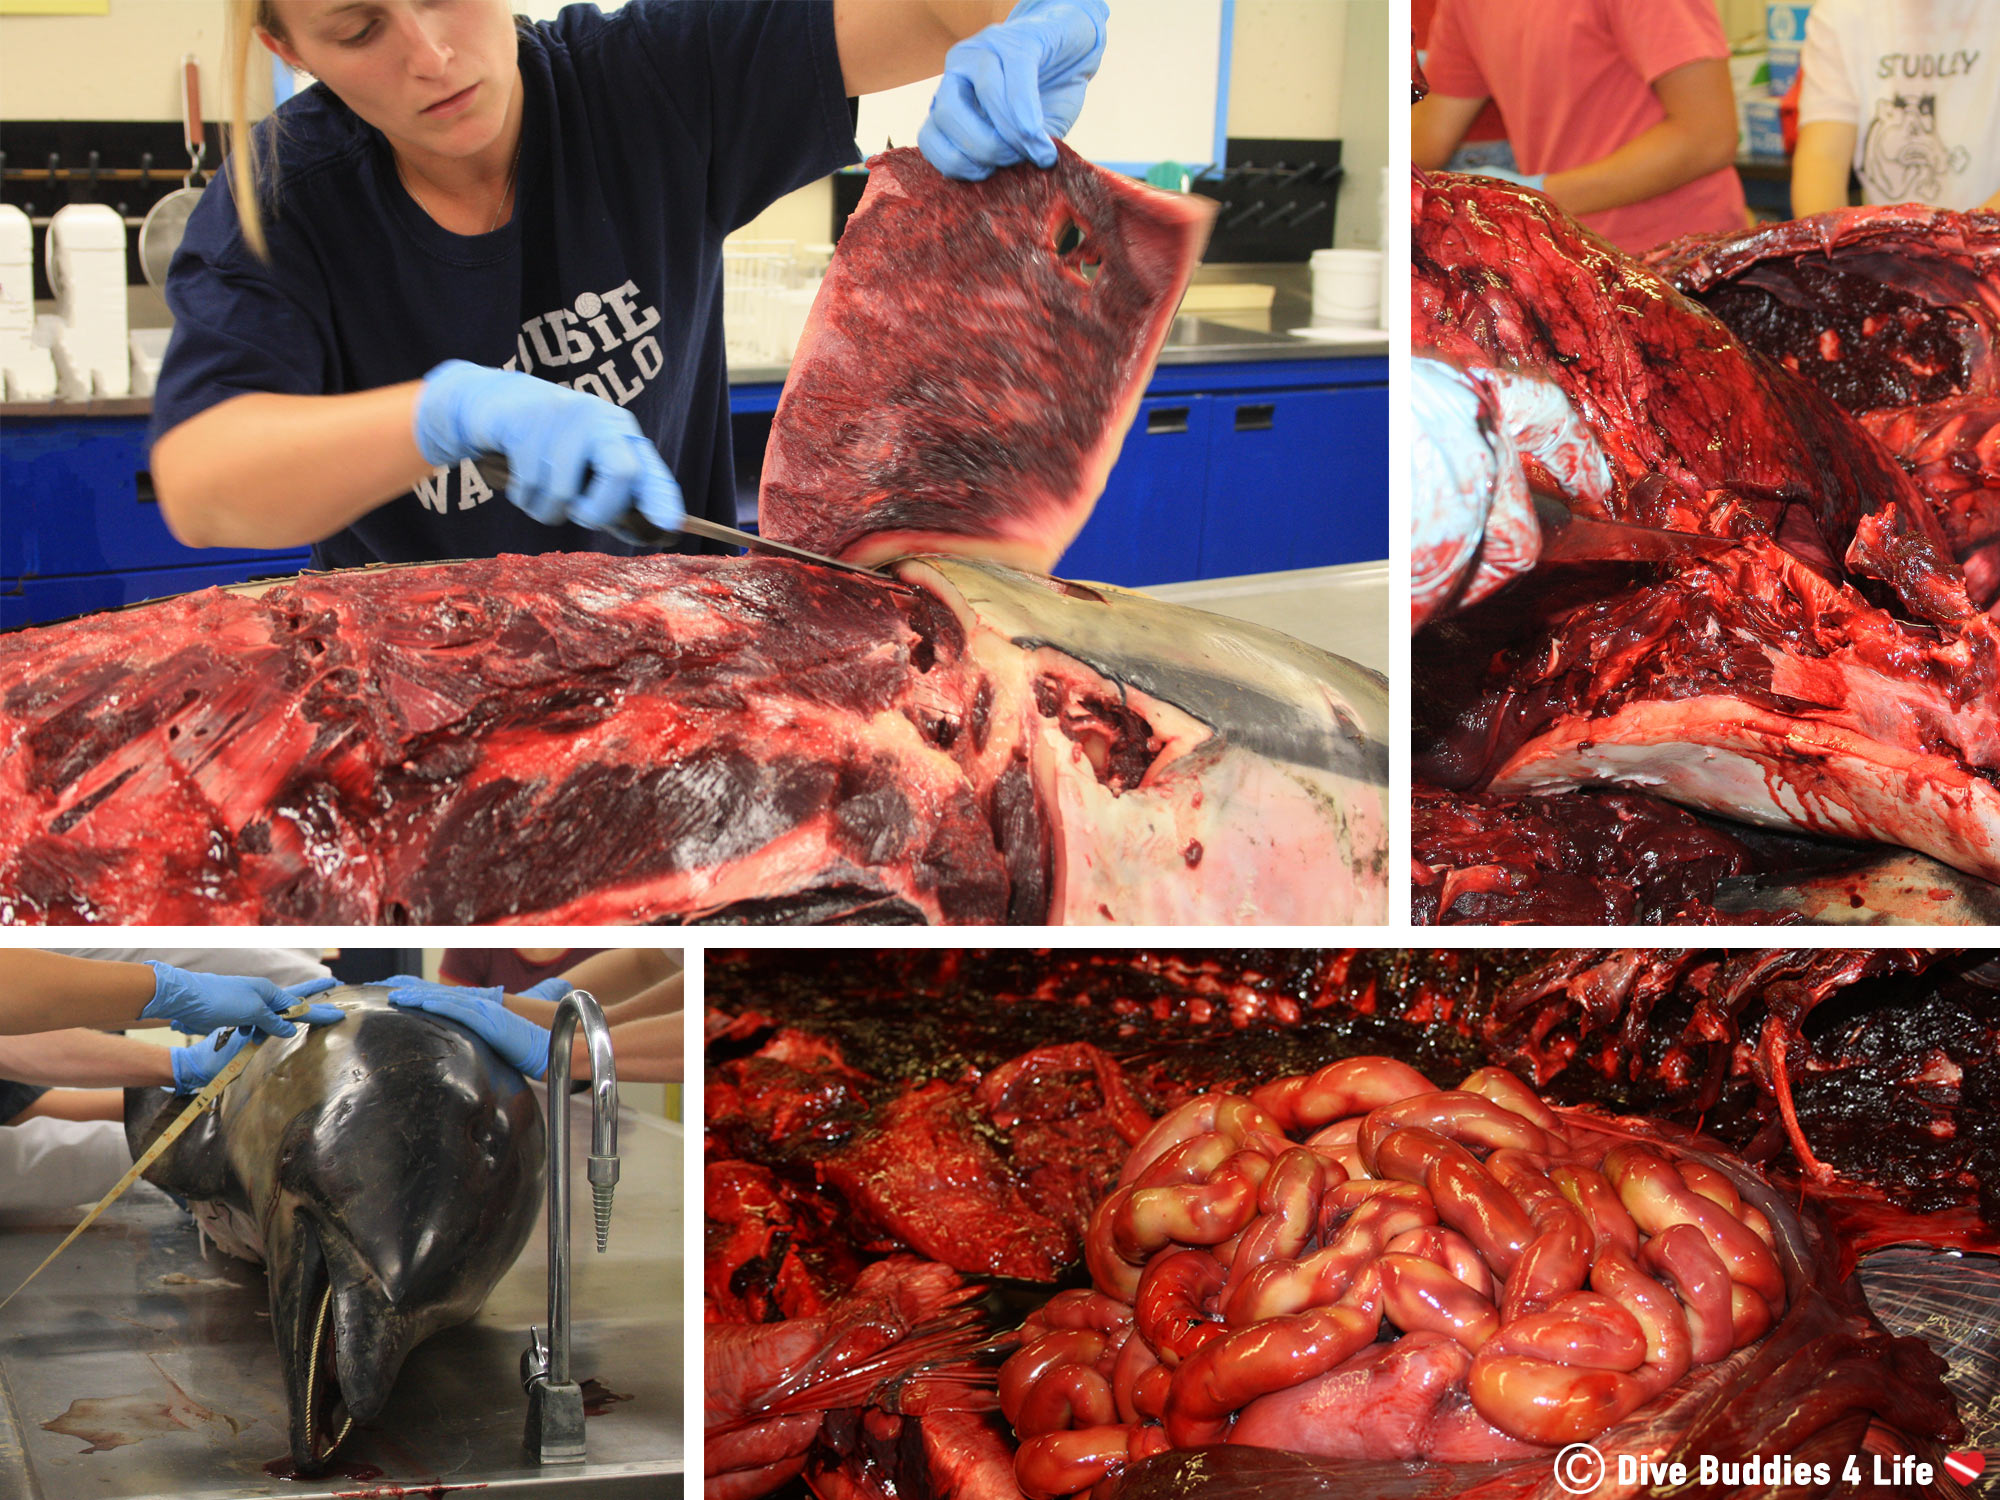 Dissecting A Marine Mammal That Was Subjected To Toxic Exposure